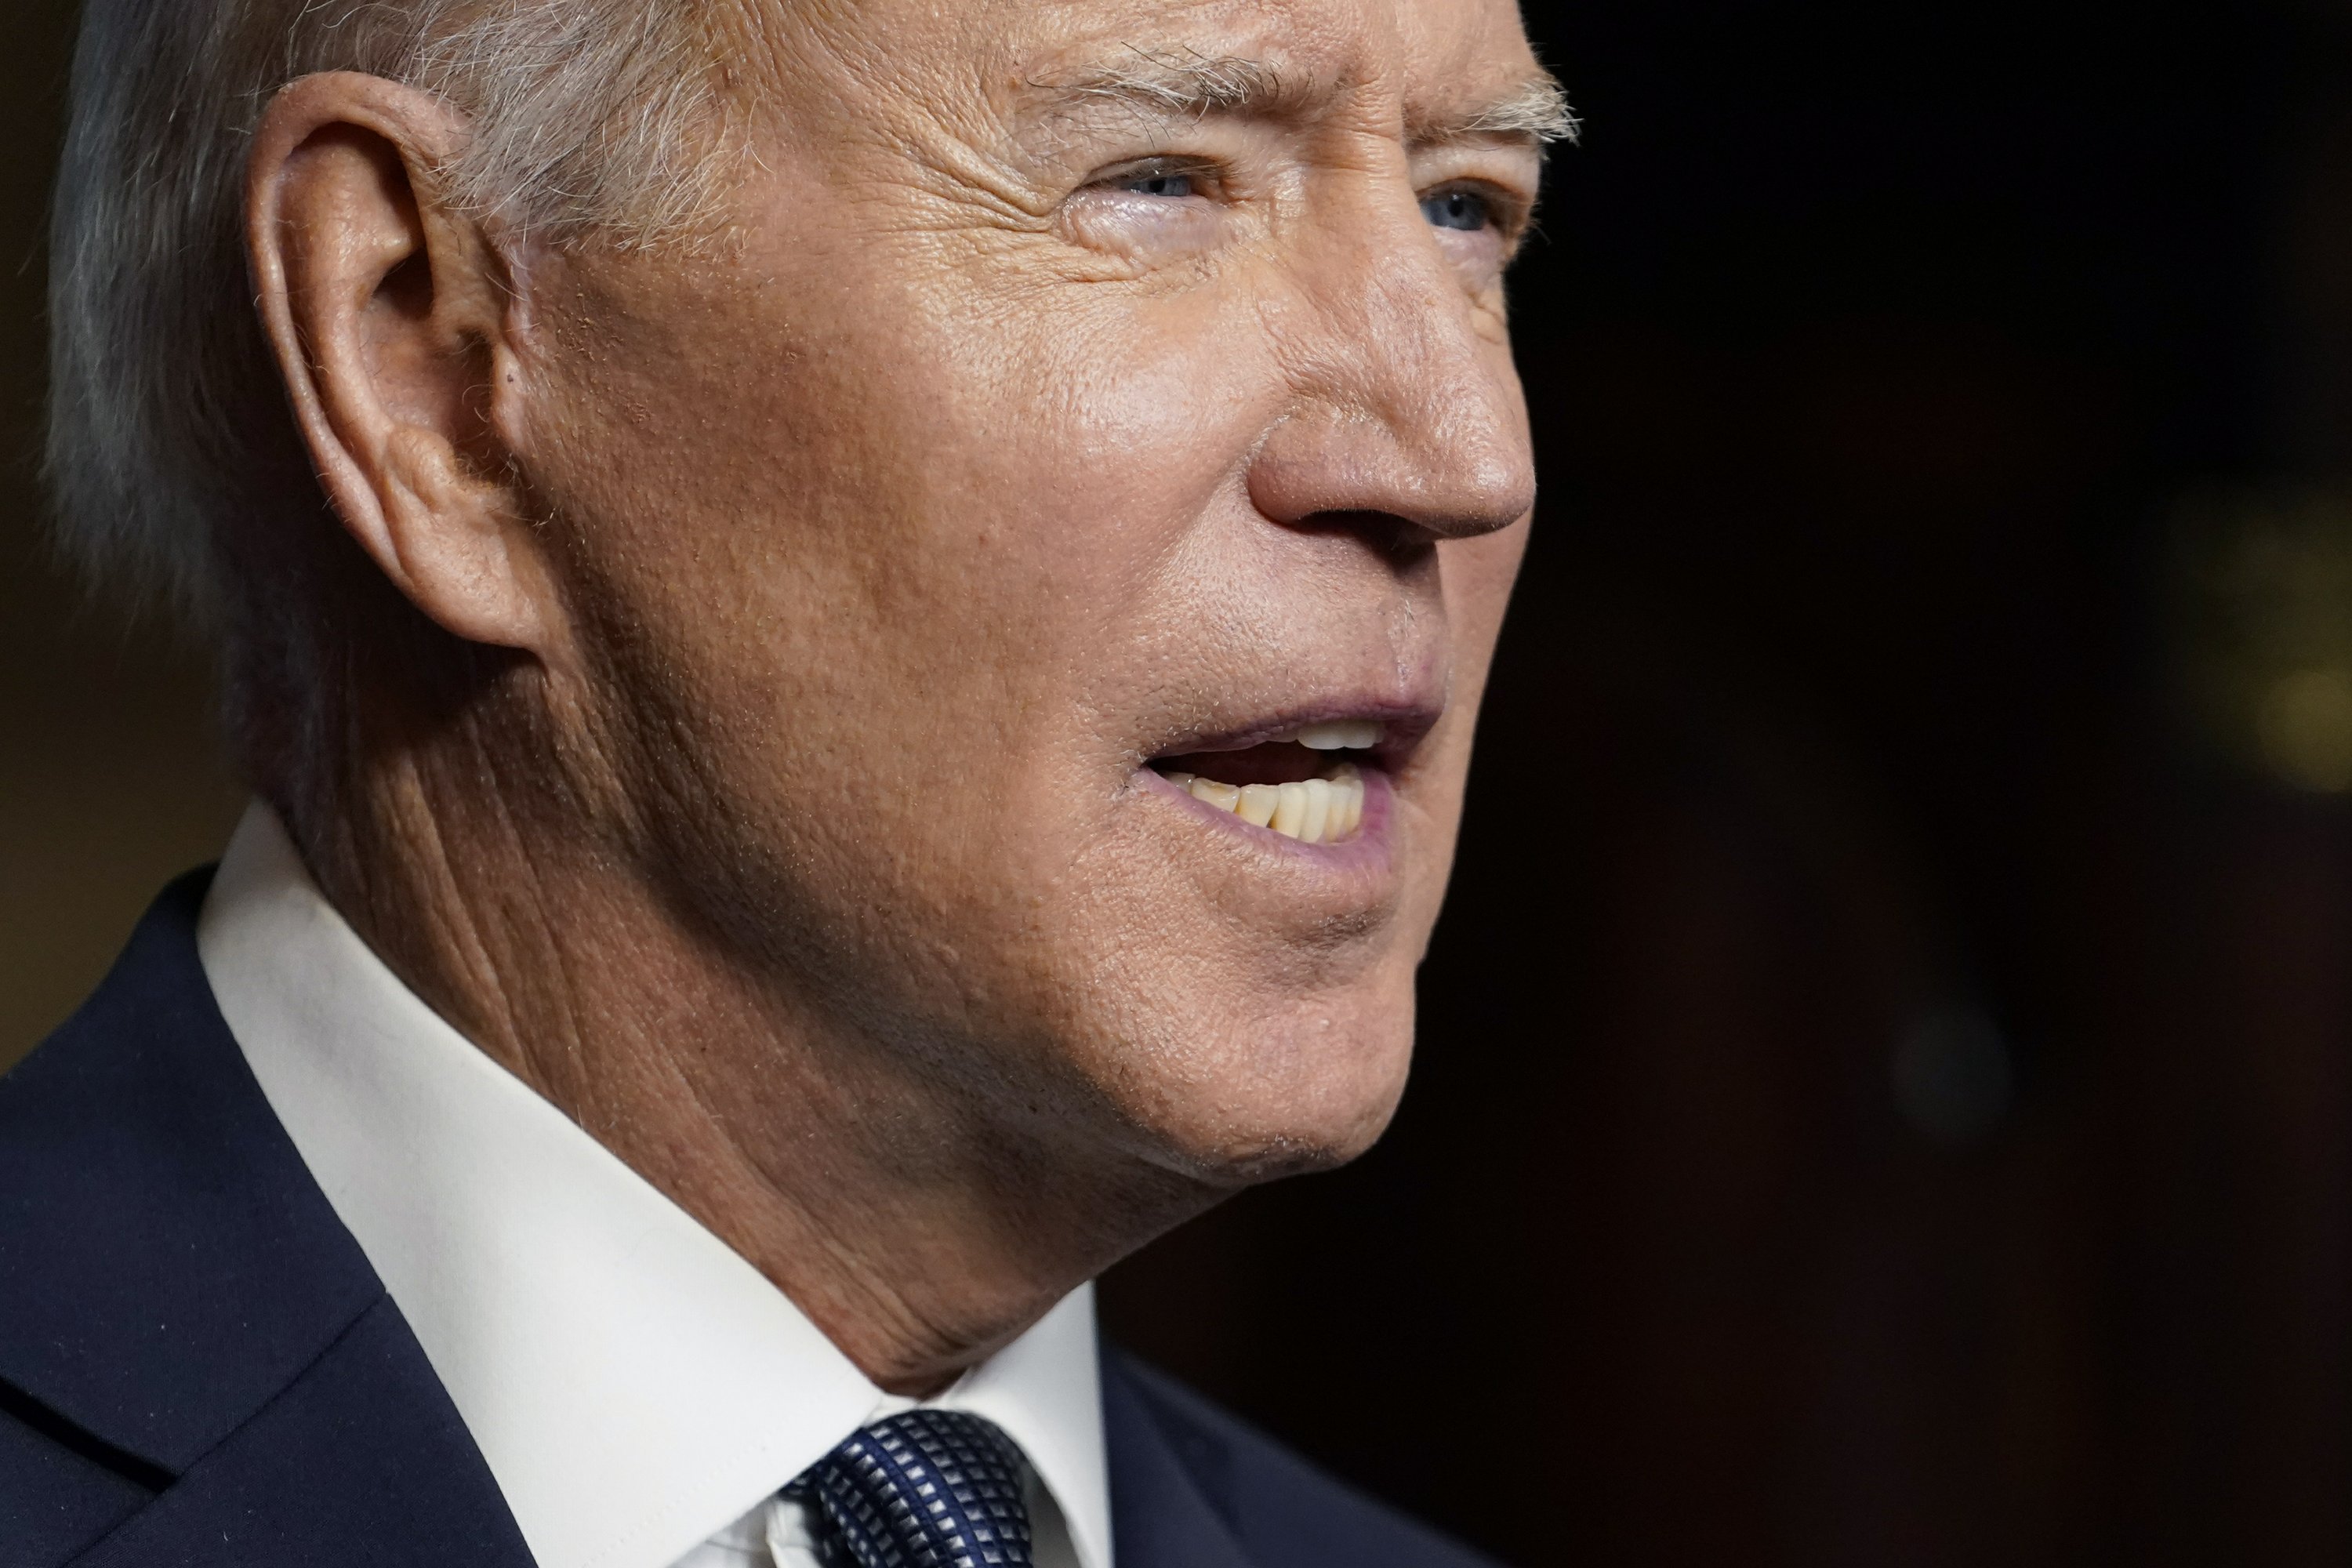 Biden to pull US troops from Afghanistan, end 'forever war' - The Associated Press